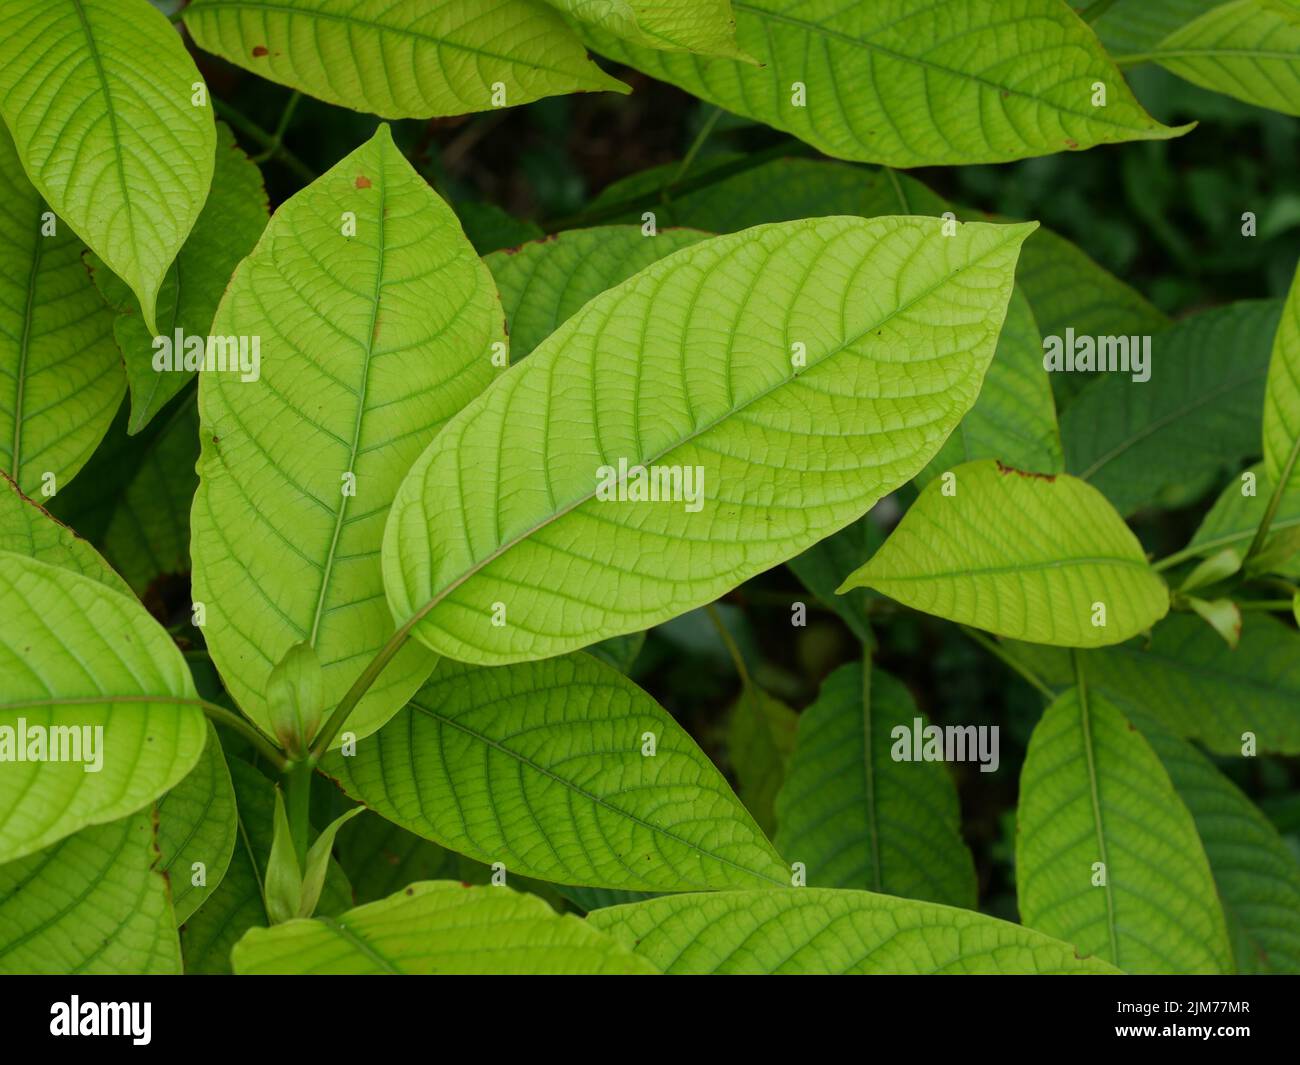 Green leaf background of Kratom or Mitragyna speciosa tree, Medicinal plant leaves Stock Photo